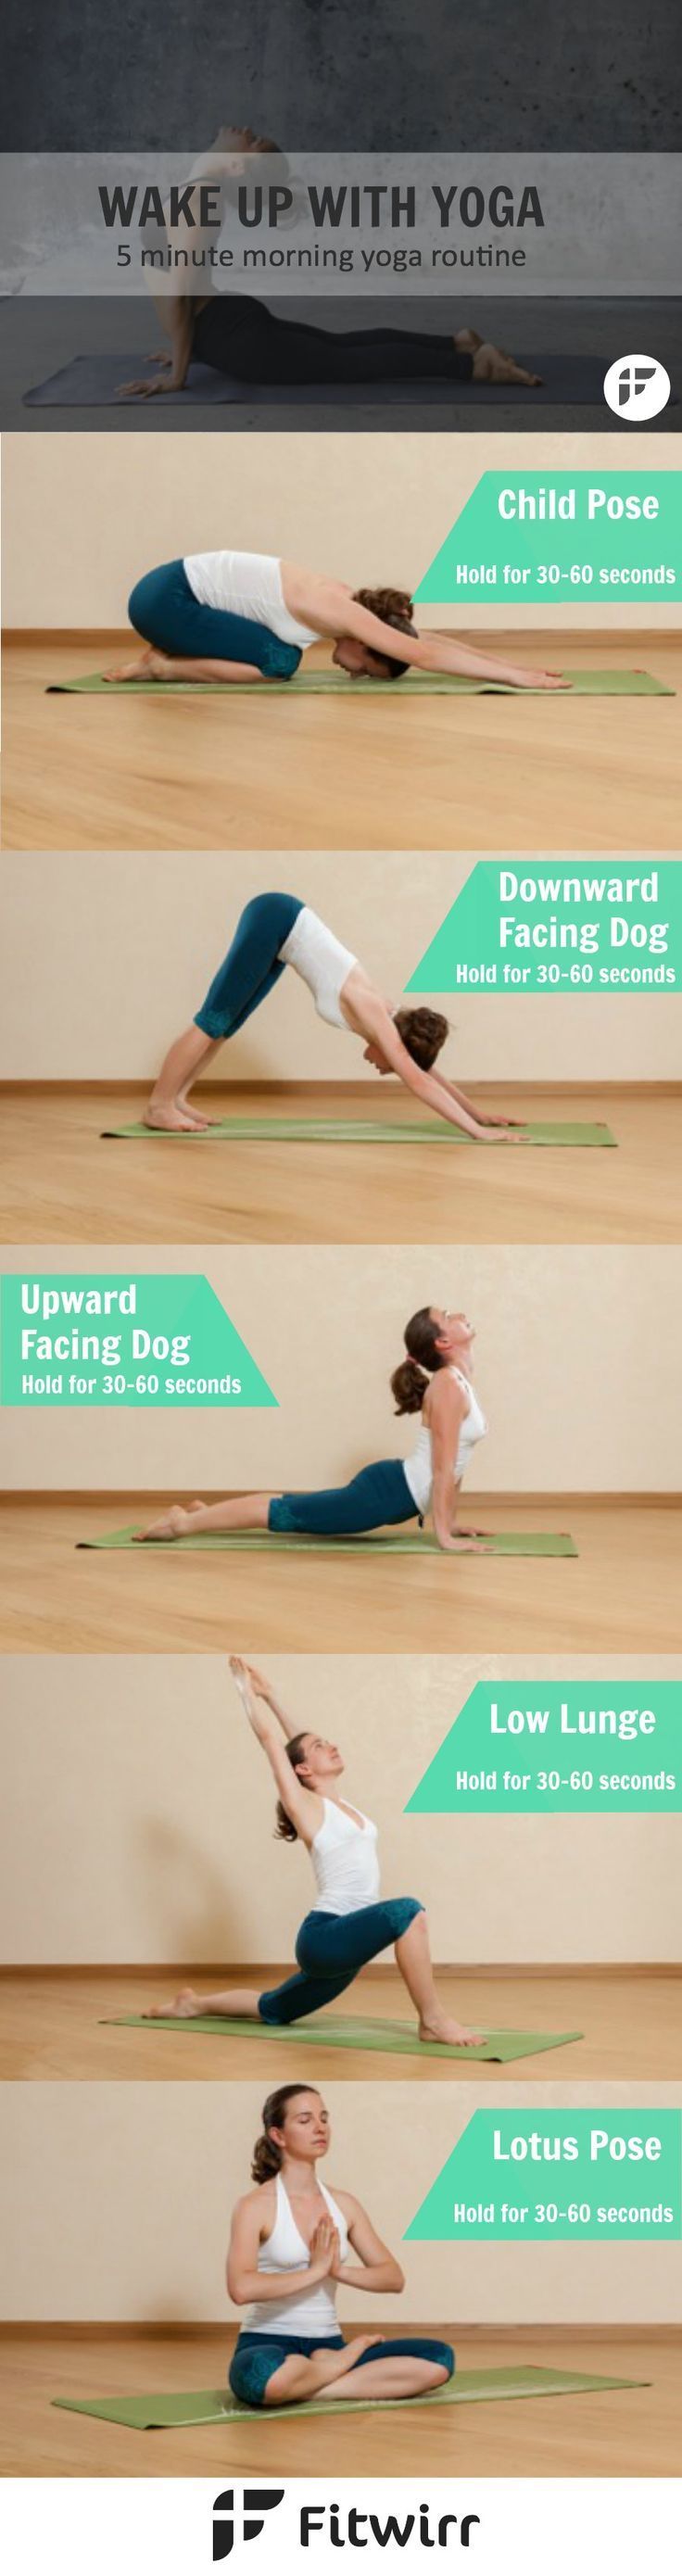 Wake Up With Yoga: 5 Minute Morning Yoga Routine